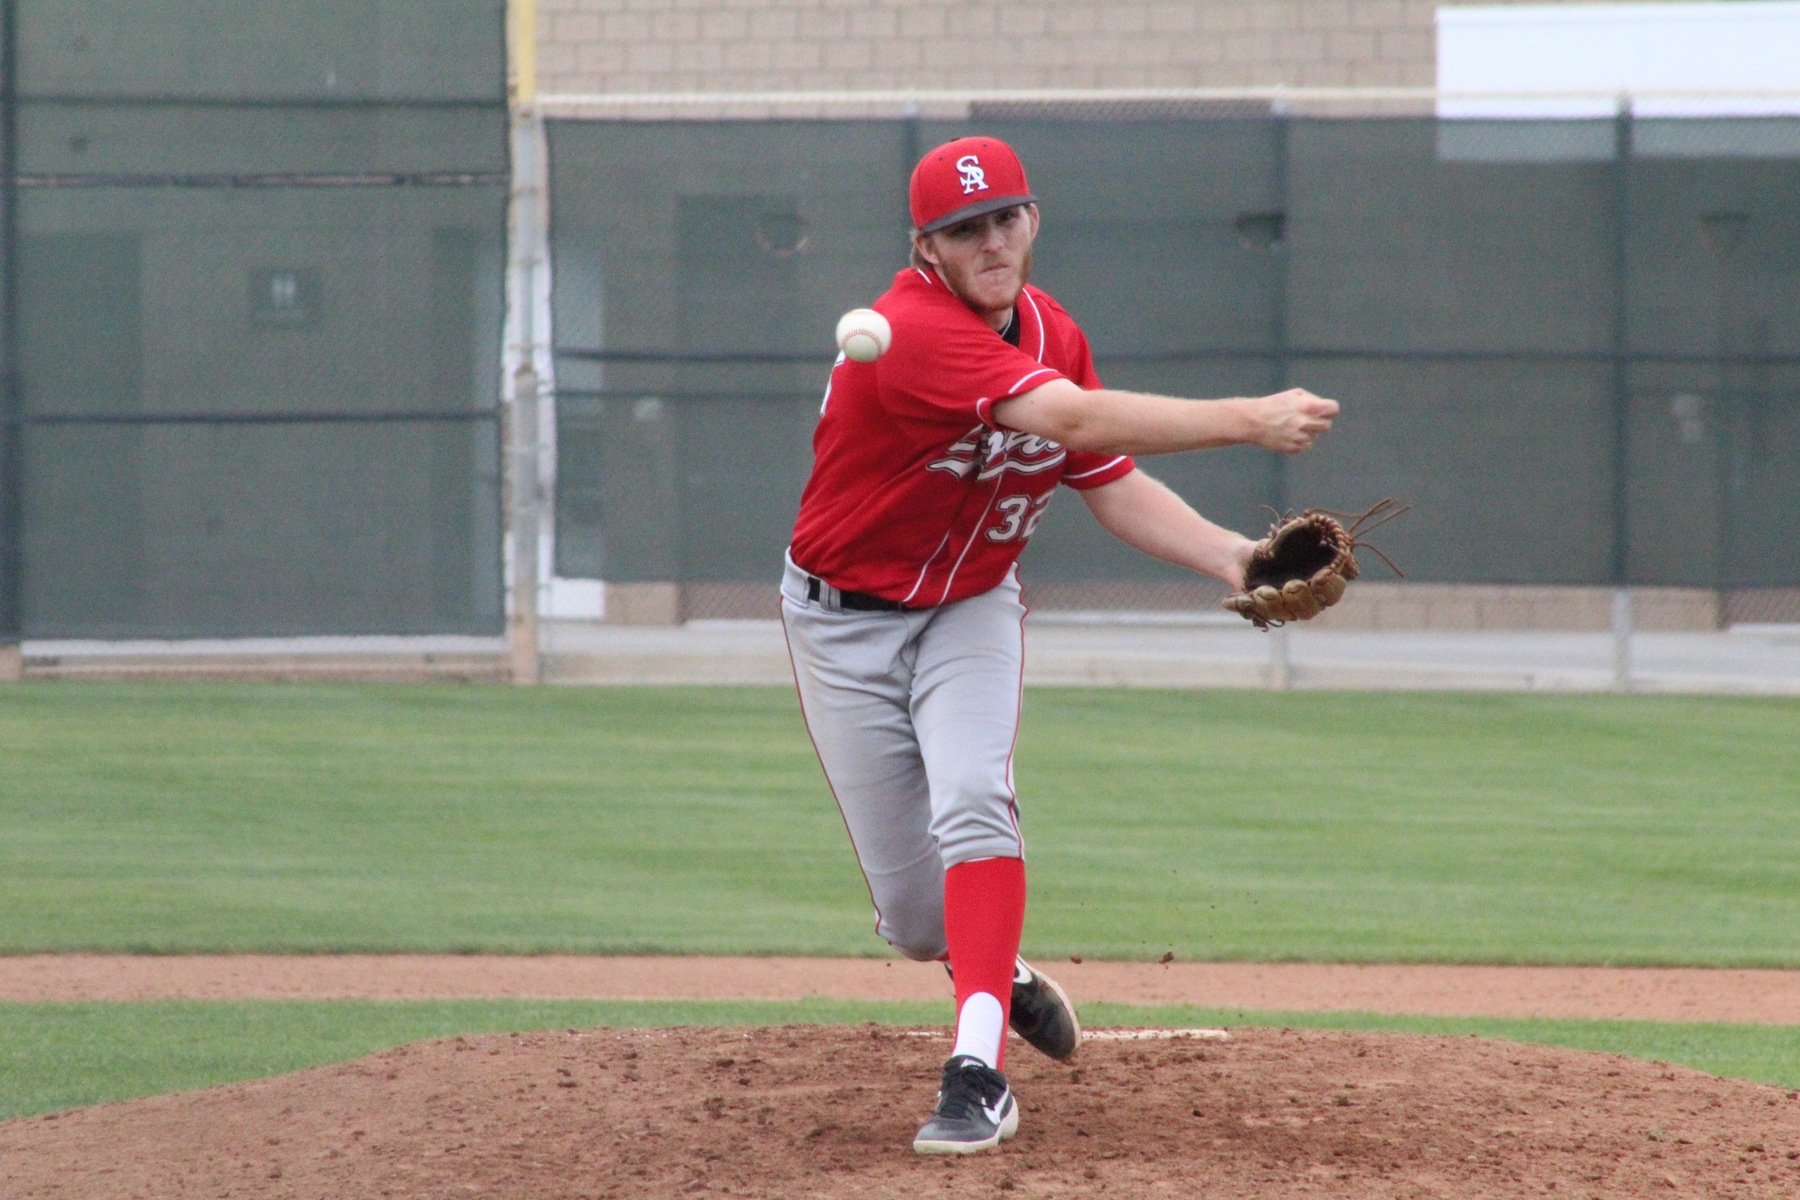 Dons Shutout 7-0, Drop Series to Canyons